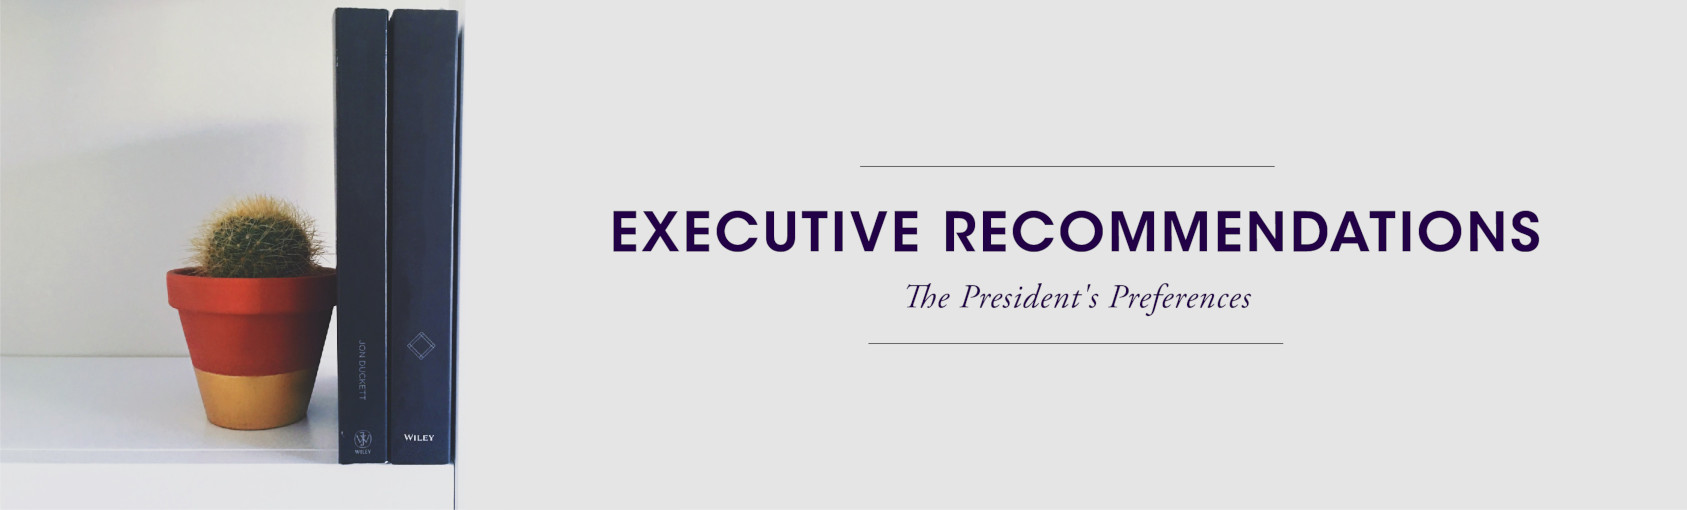 ASI Exec Officer Recommendations: The President’s Preferences banner